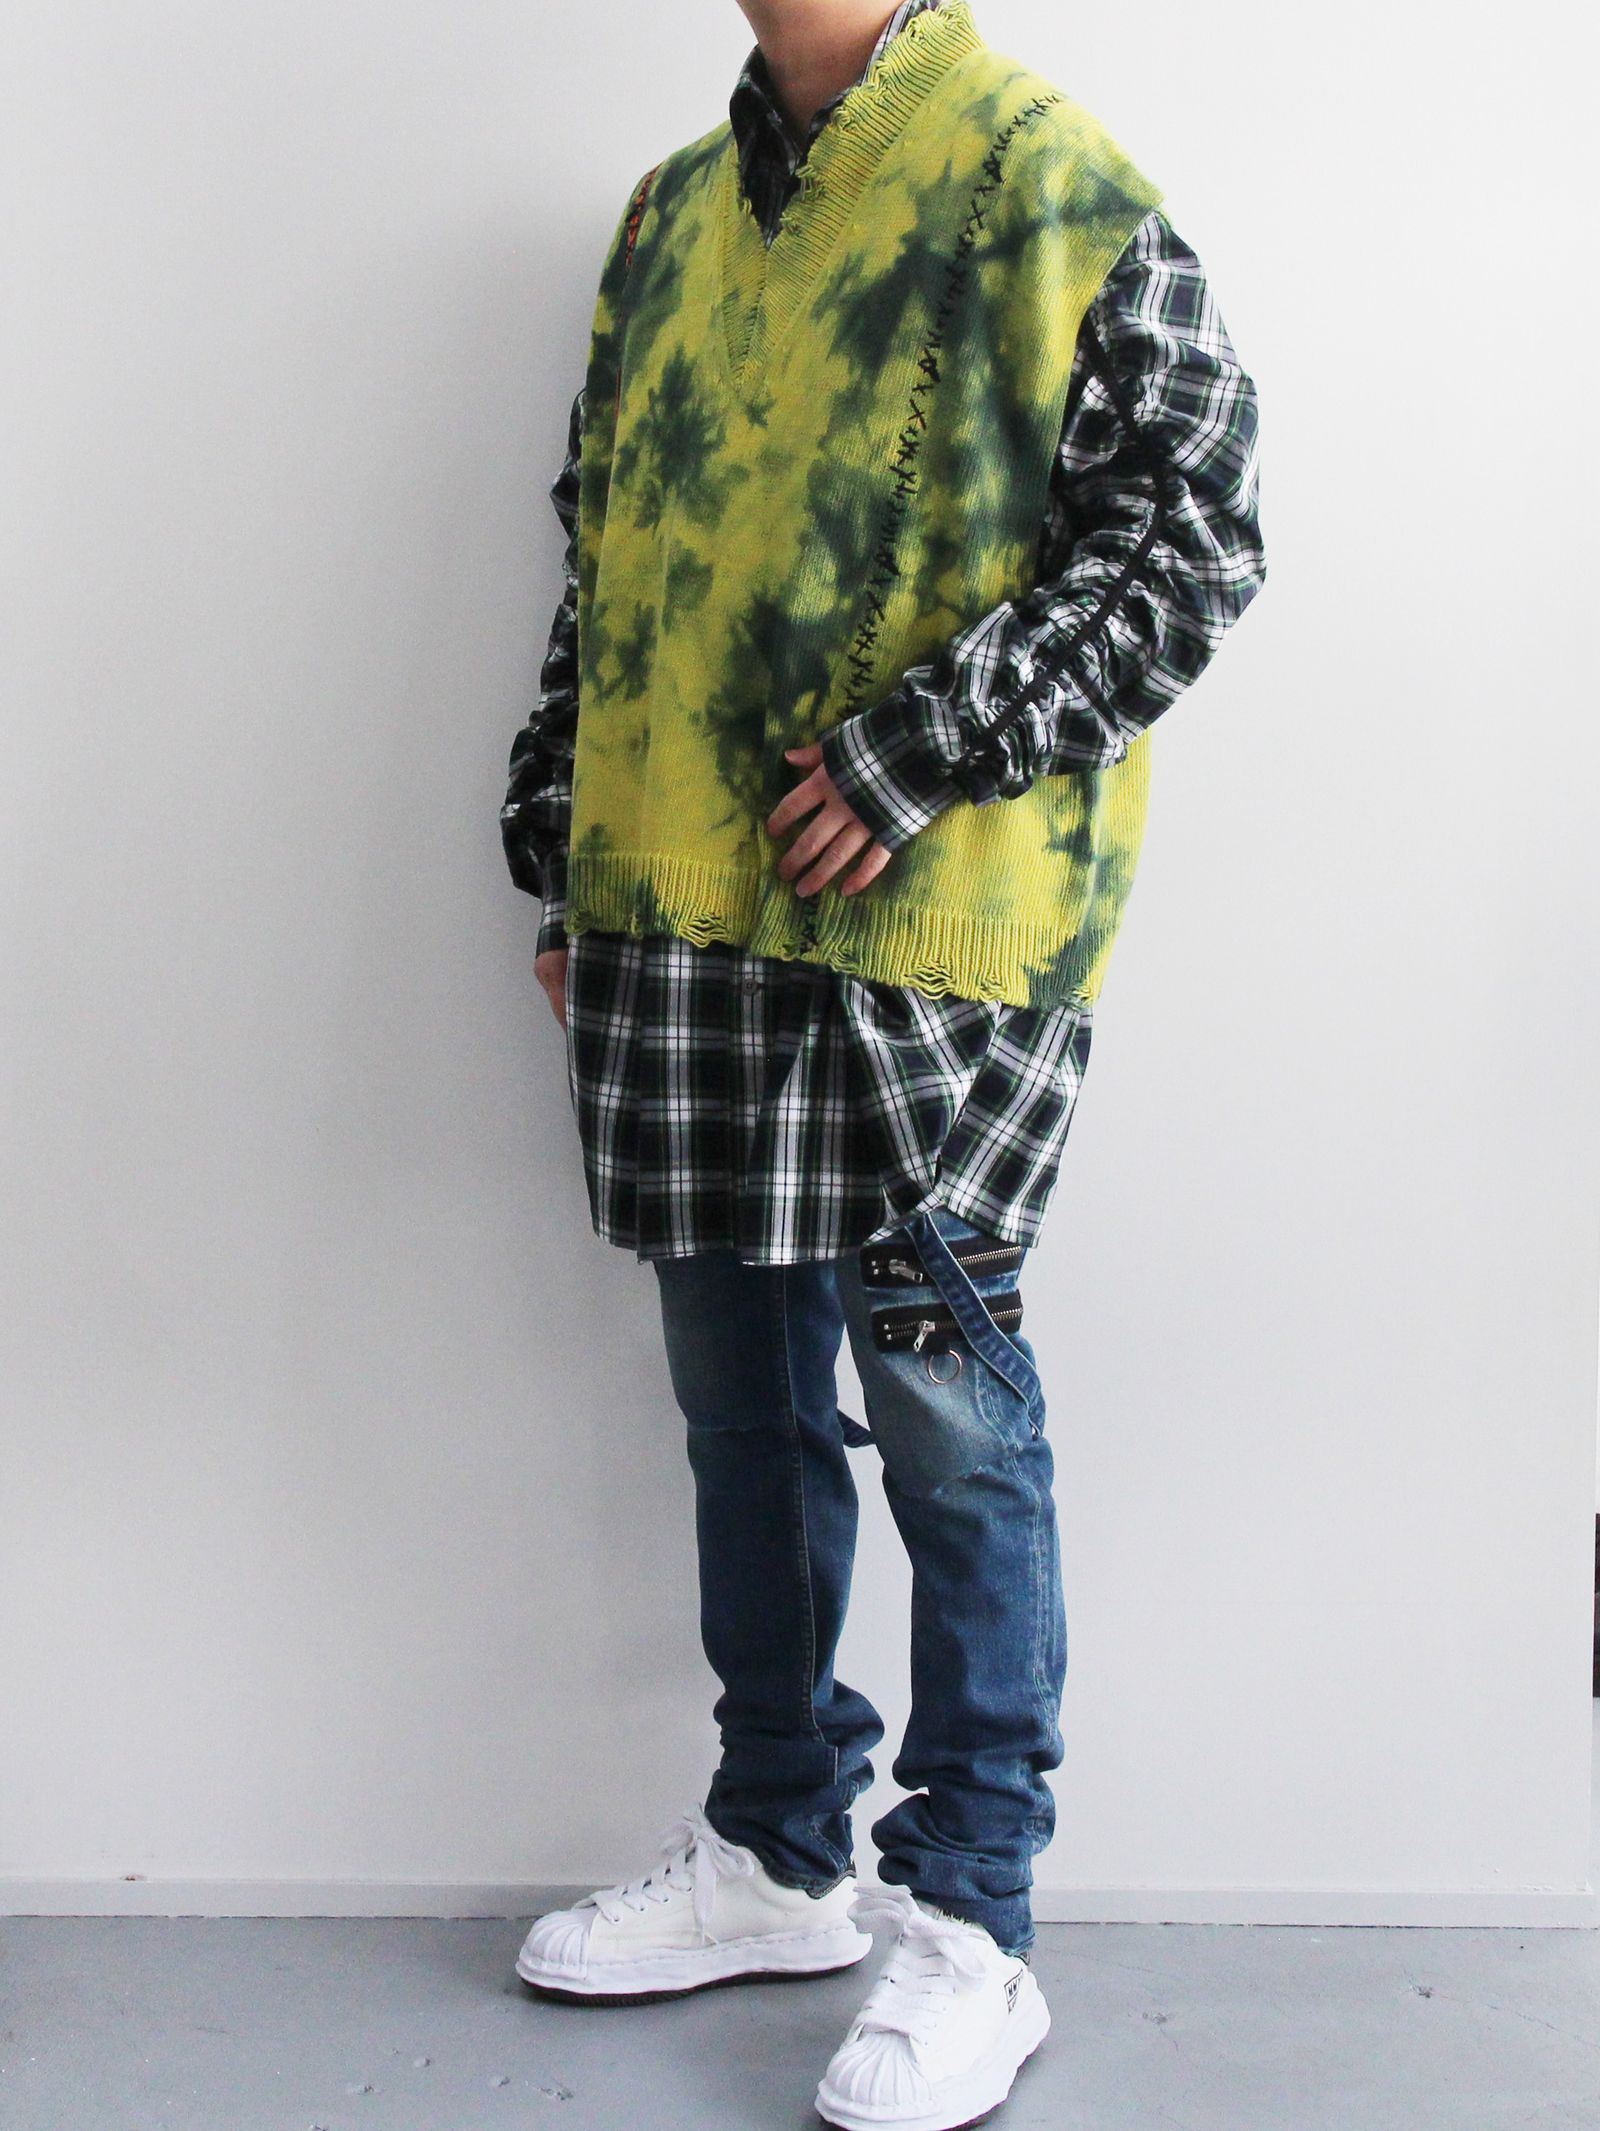 KIDILL - KNIT VEST - COLLABORATION WITH rurumu: YELLOW